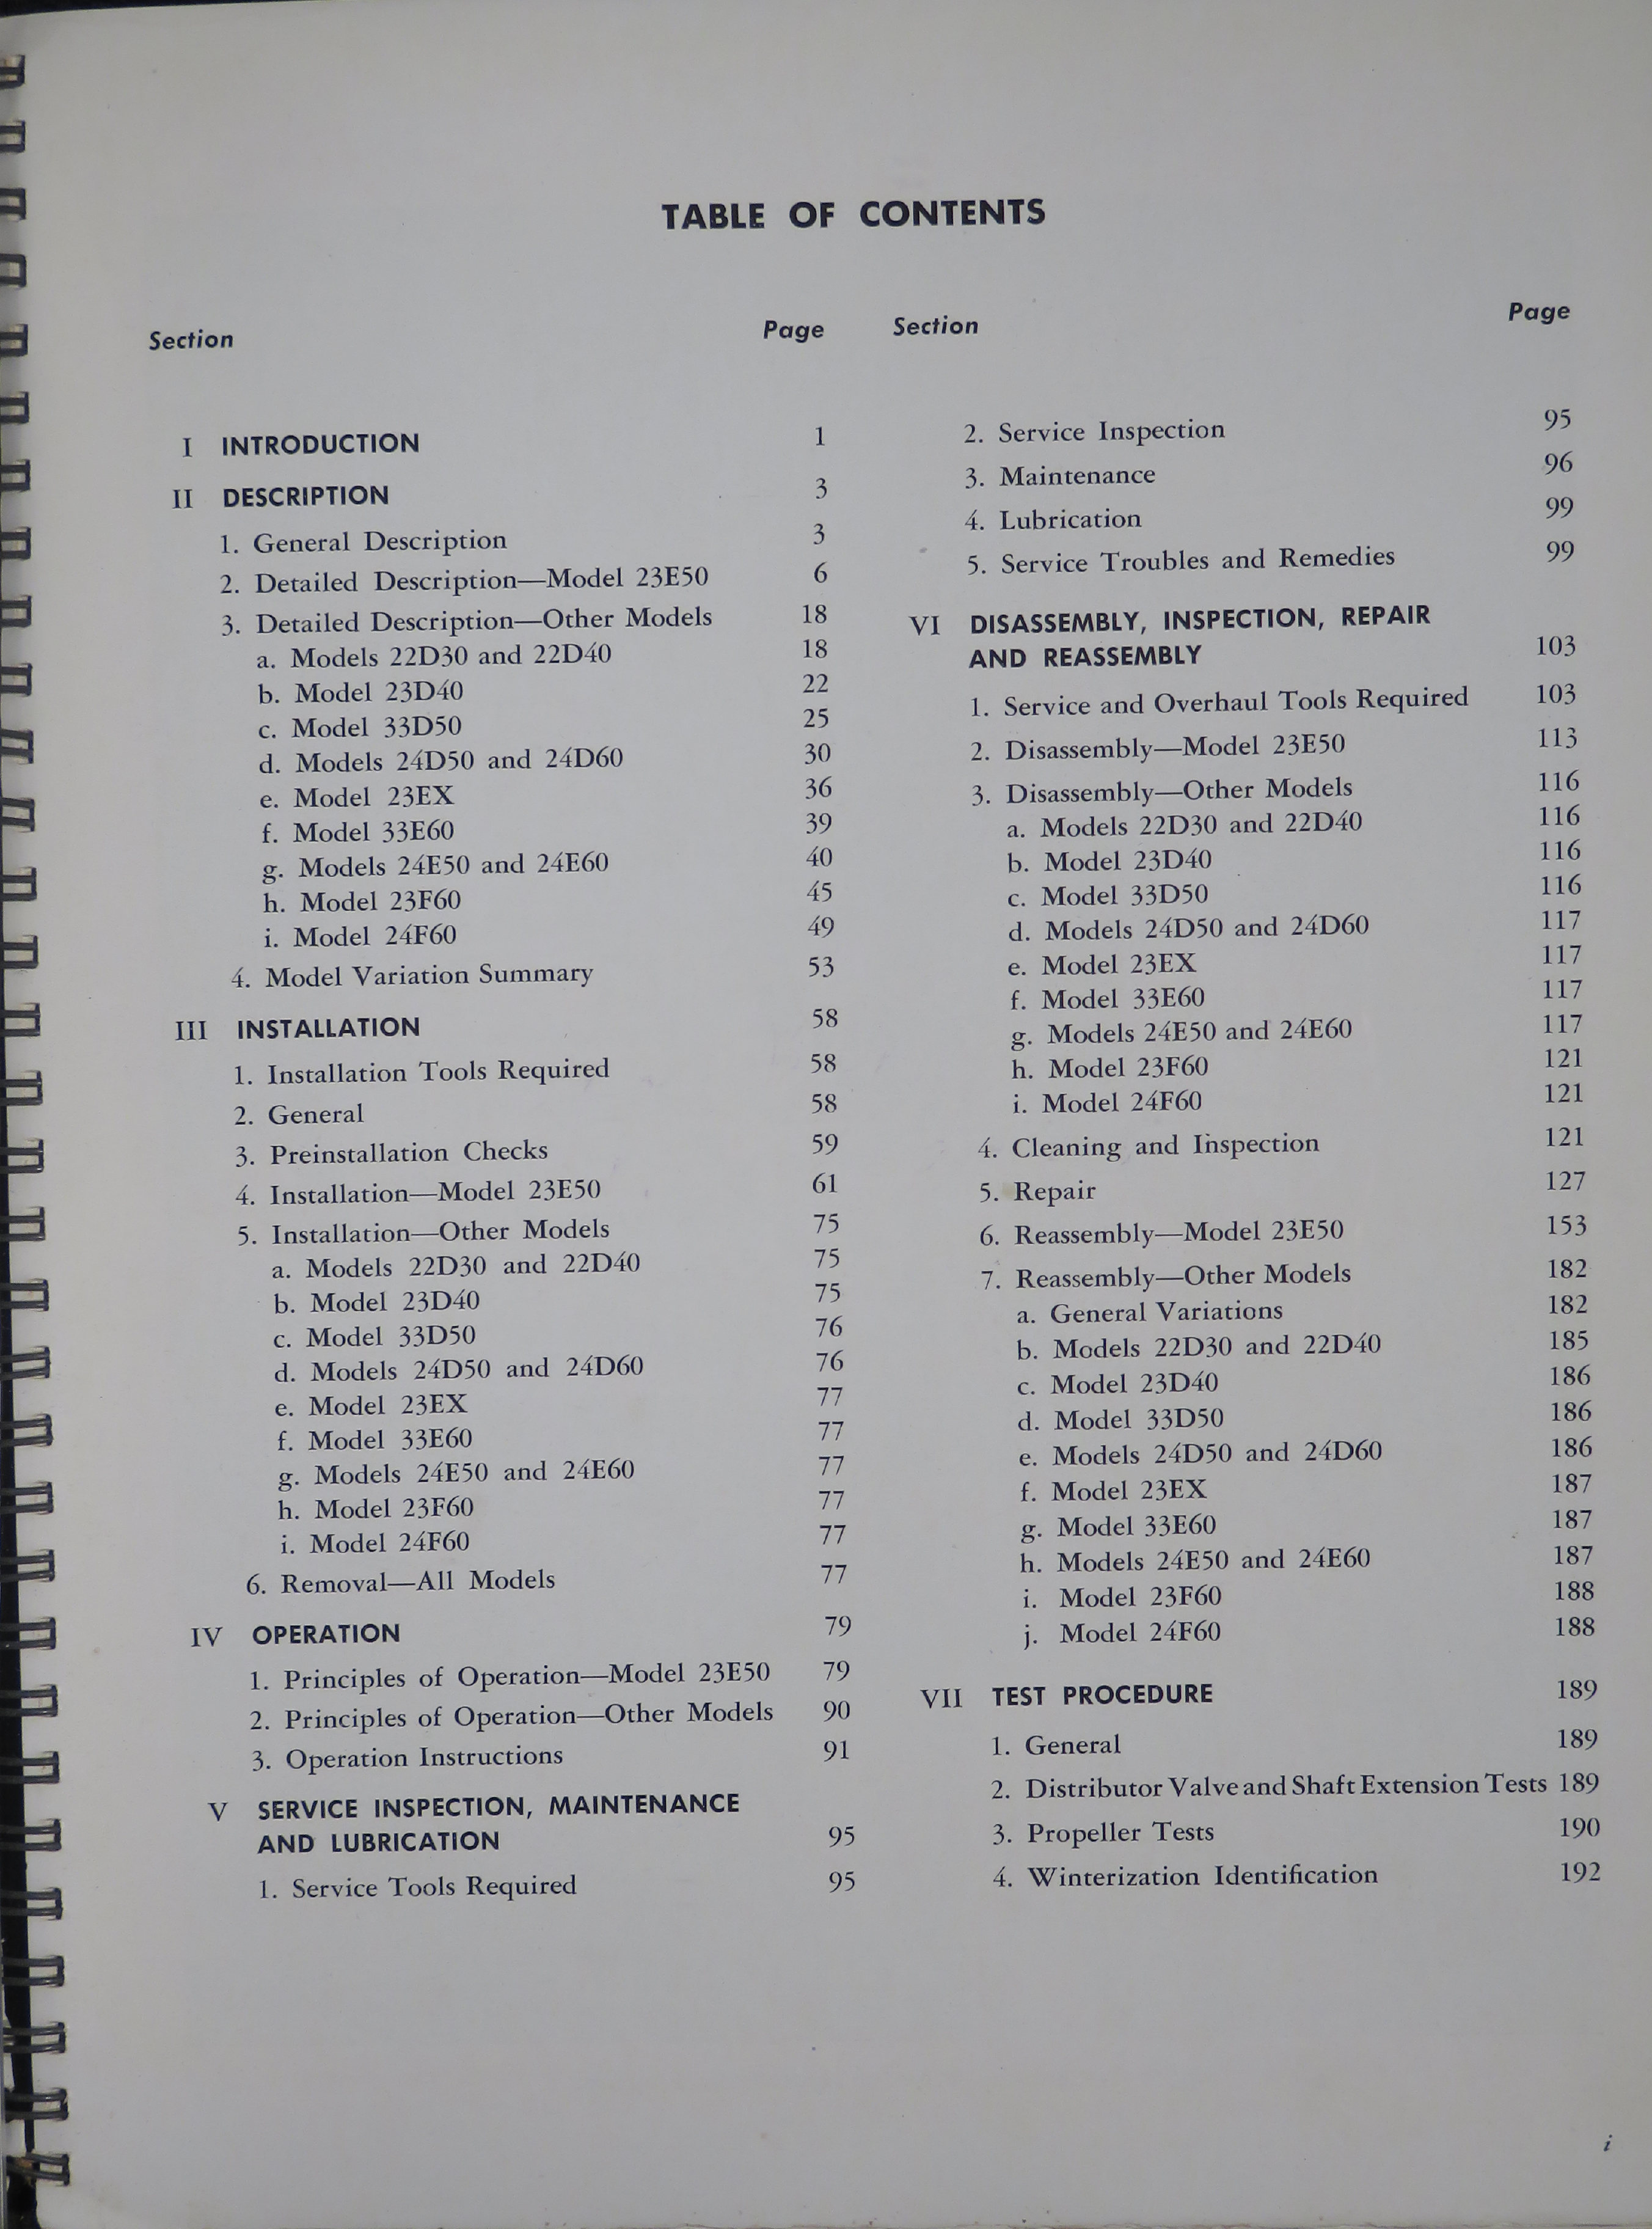 Sample page 5 from AirCorps Library document: Service Manual for Quick-Feathering Hydromatic Propellers